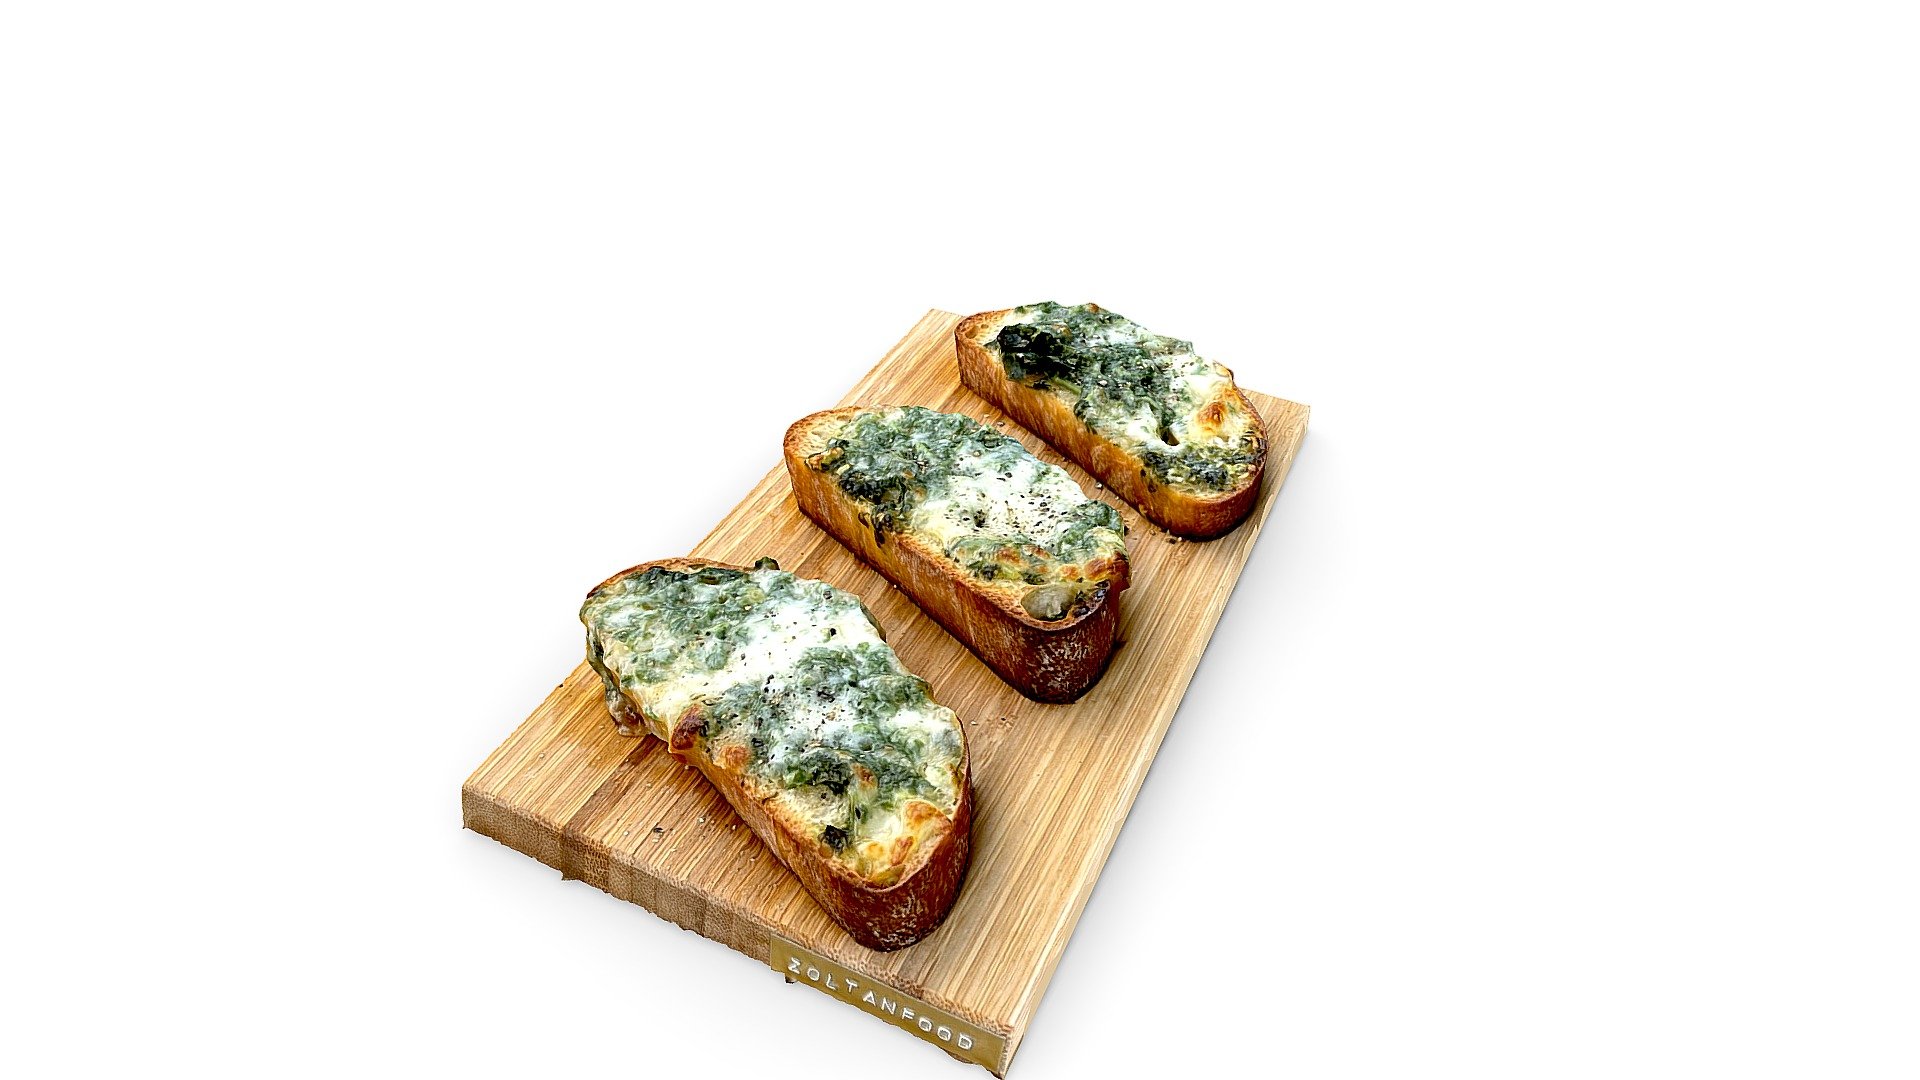 All you need is melted butter with parsley and garlic and some leftover bread. You can bake it in the oven in a few minutes.

Check my AR/VR recipes and support me on Patreon - Garlic bread with cheese 3d model